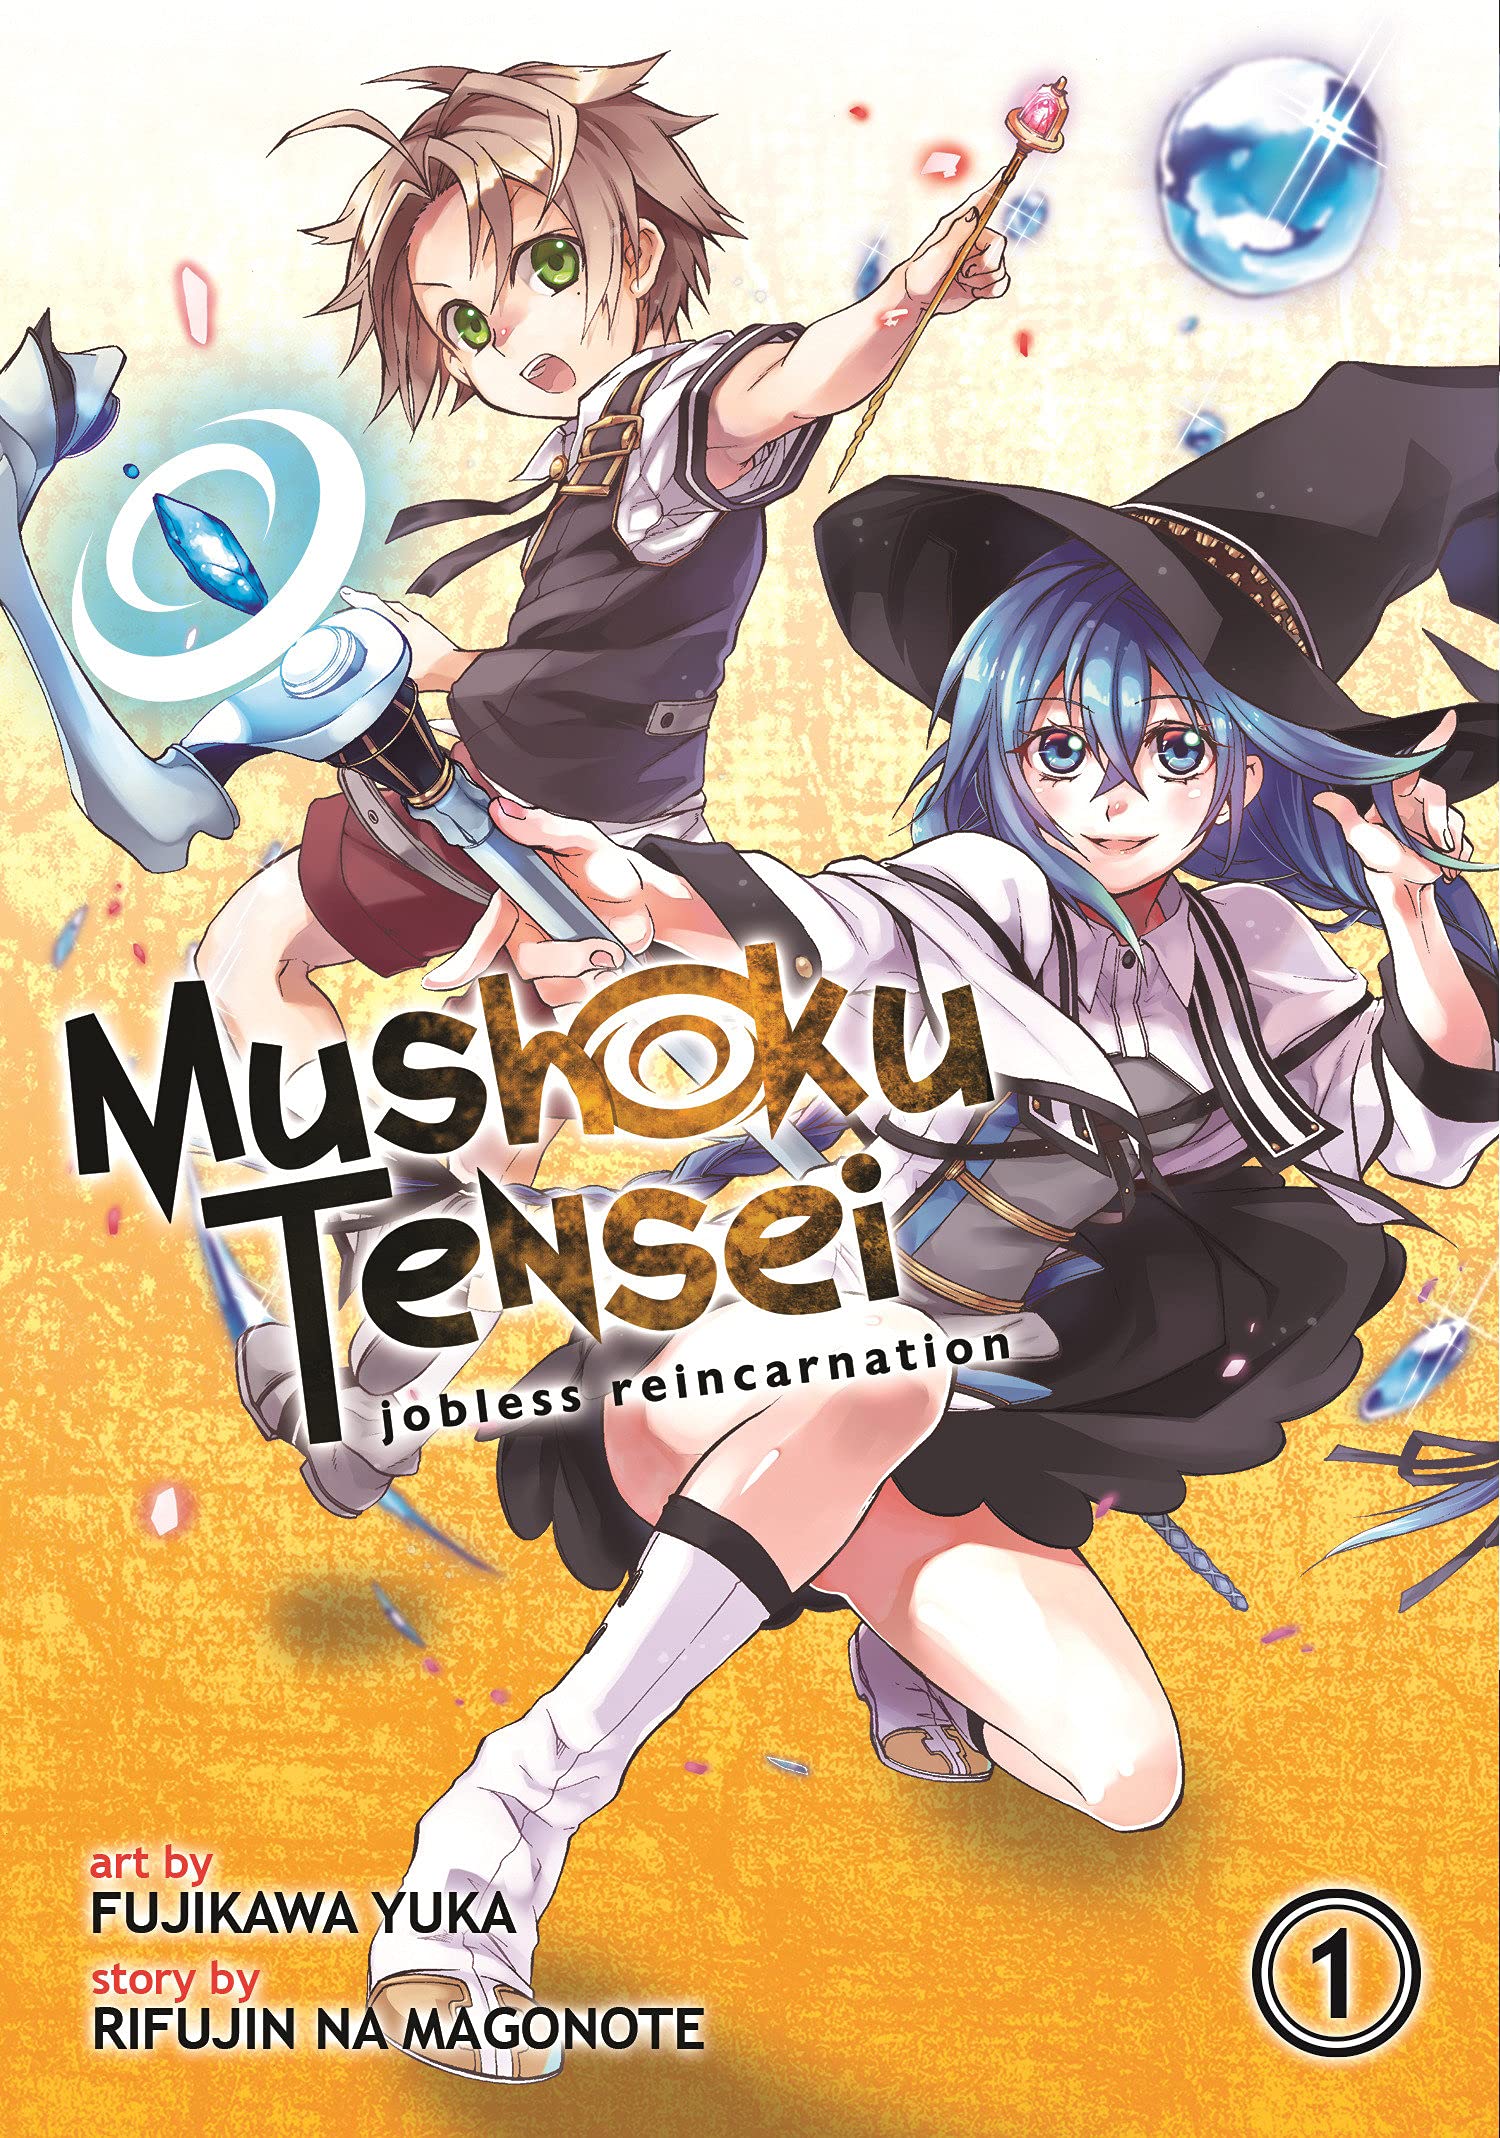 Mushoku Tensei Chapter 75 |Release Date and Timings| Read Online|